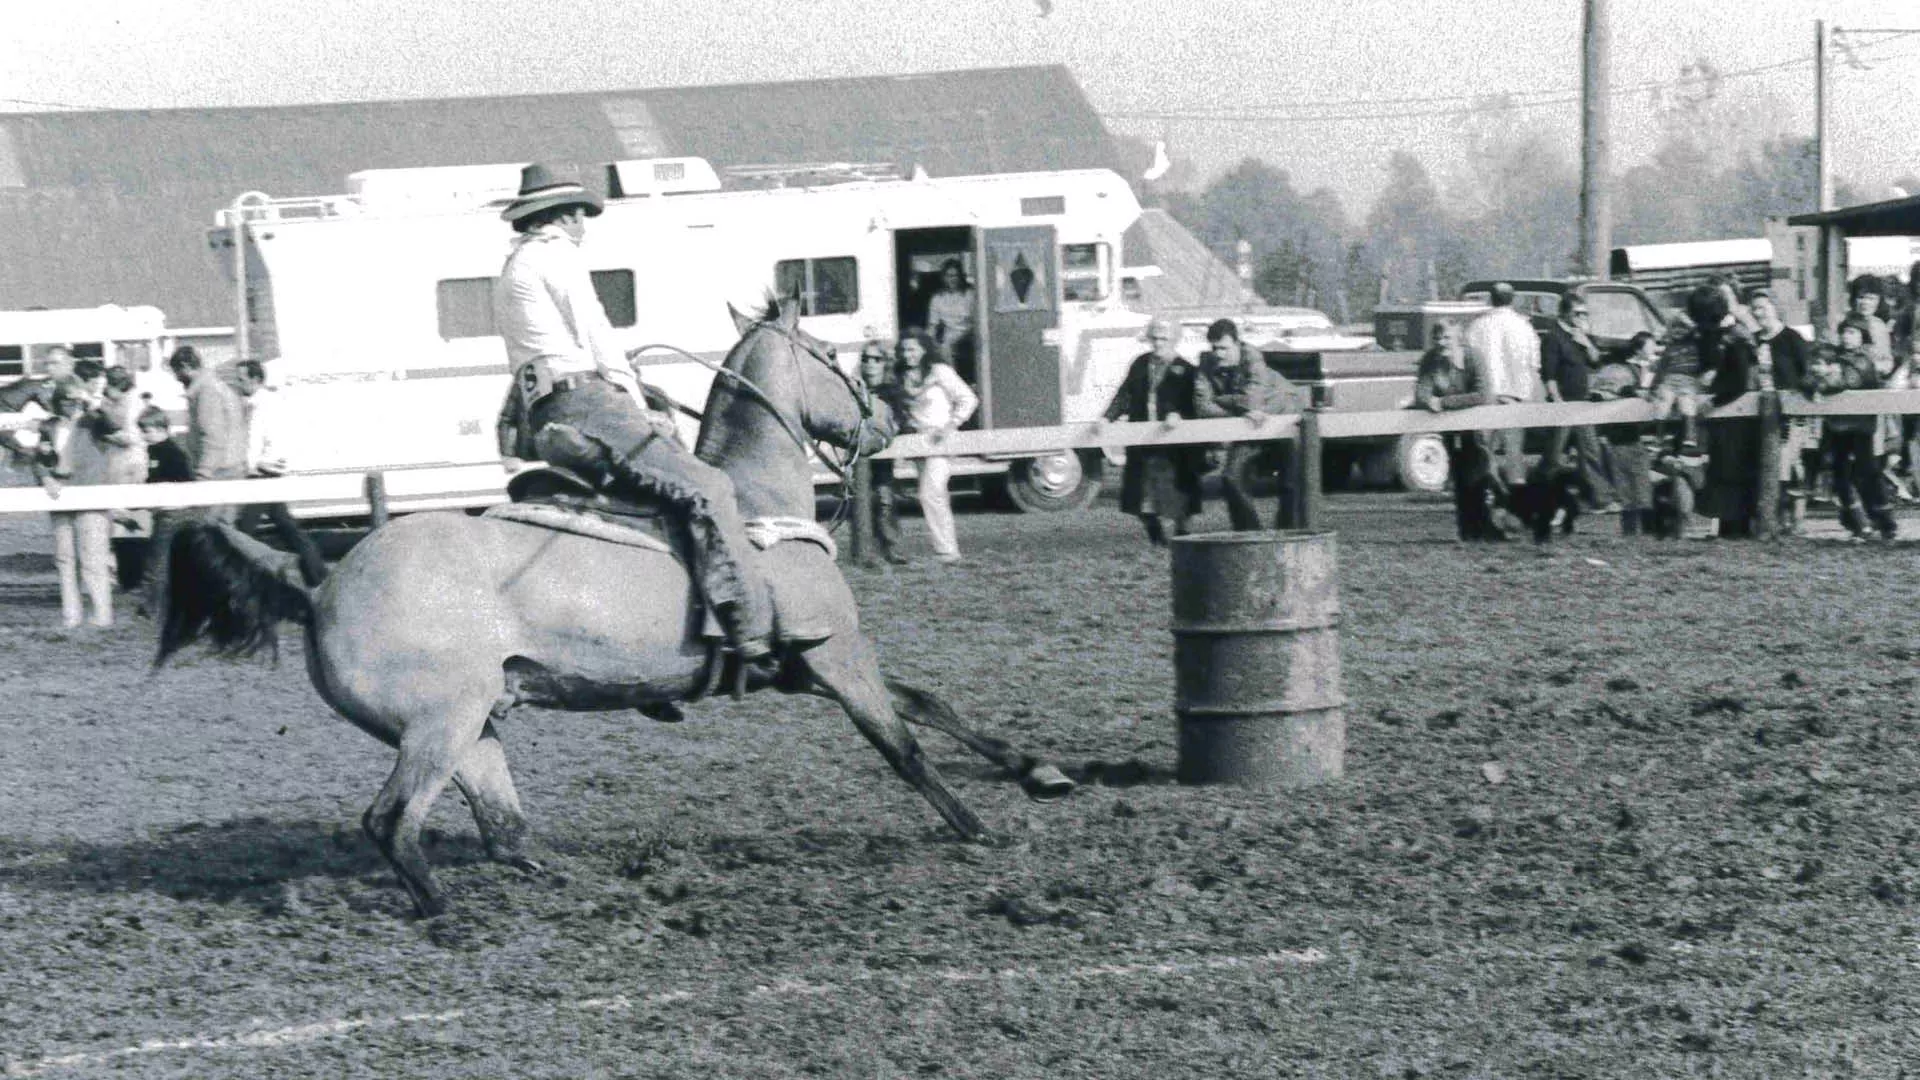 A man riding a horse around a barrel in a black and white photo